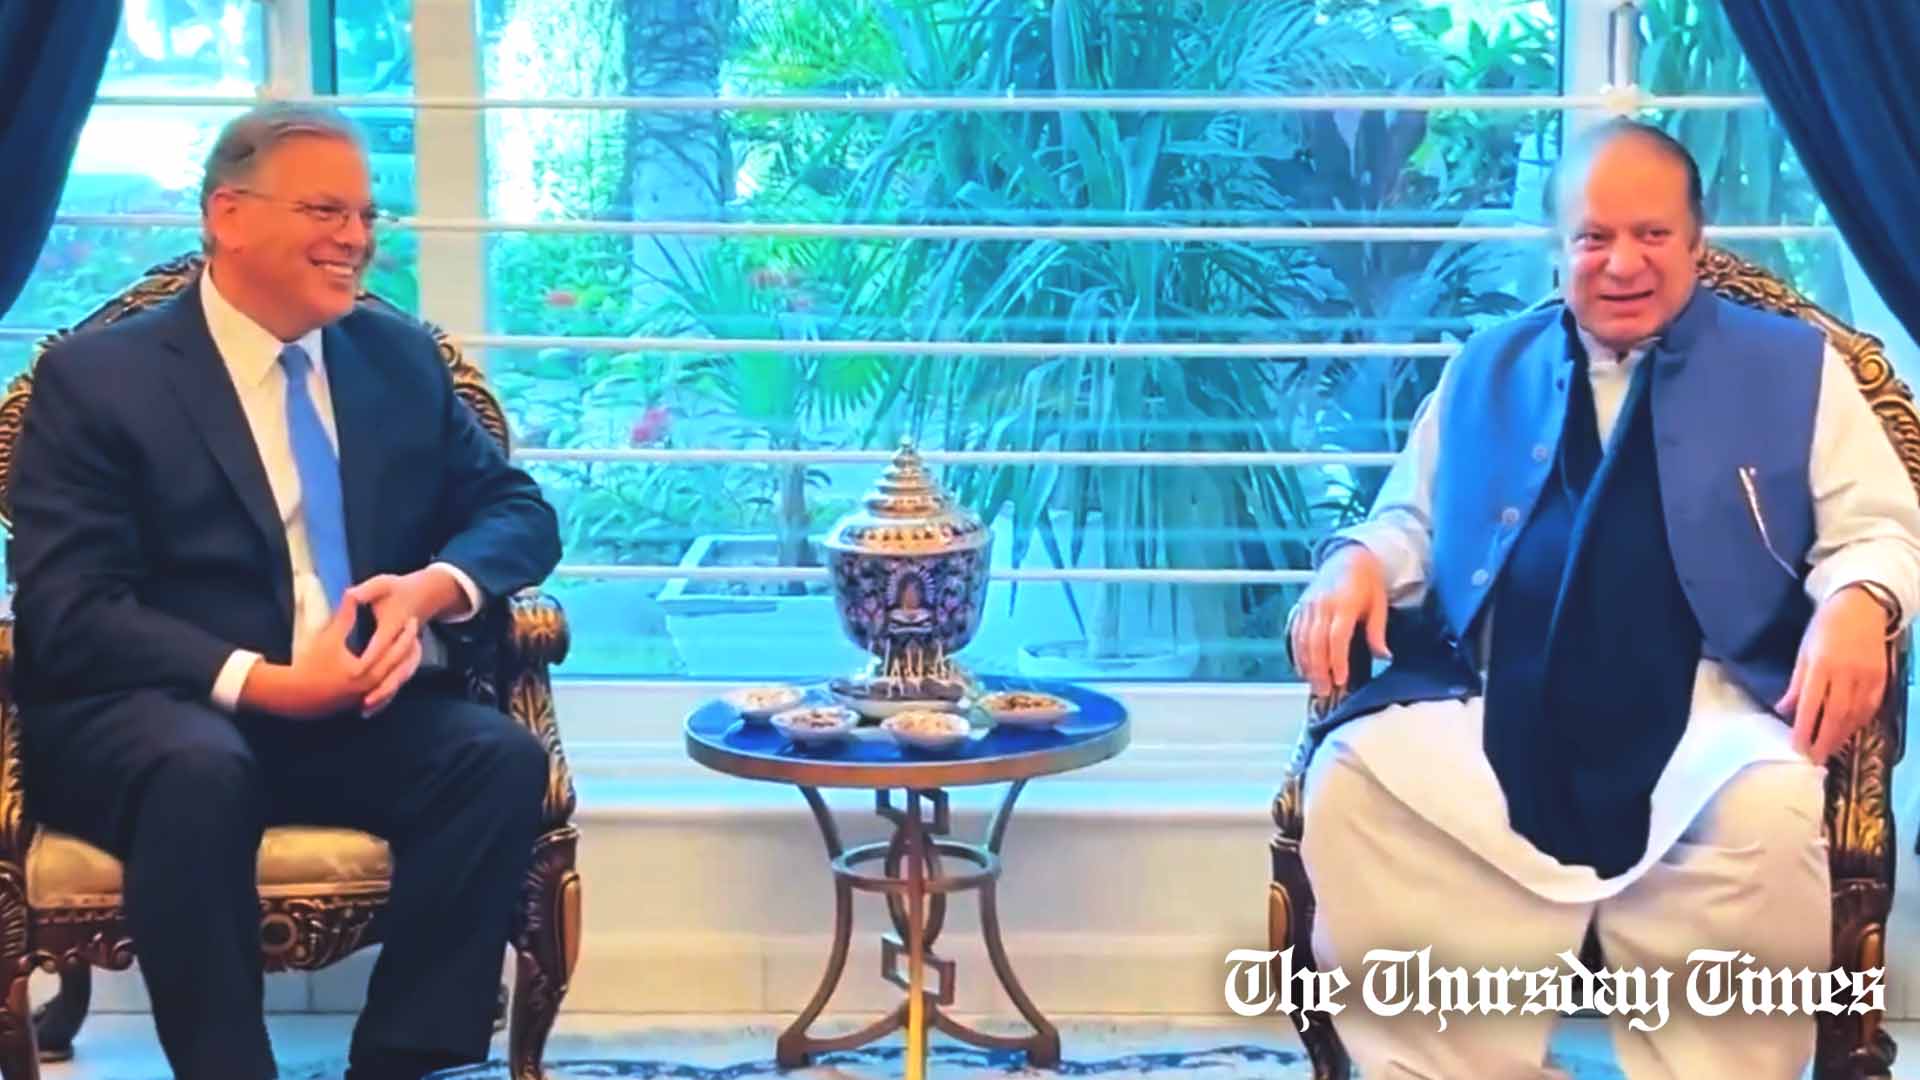 A file photo is shown of U.S. Ambassador to Pakistan Donald Blome (L) in conversation with PML(N) supremo and former Pakistani prime minister Nawaz Sharif (R). — FILE/THE THURSDAY TIMES